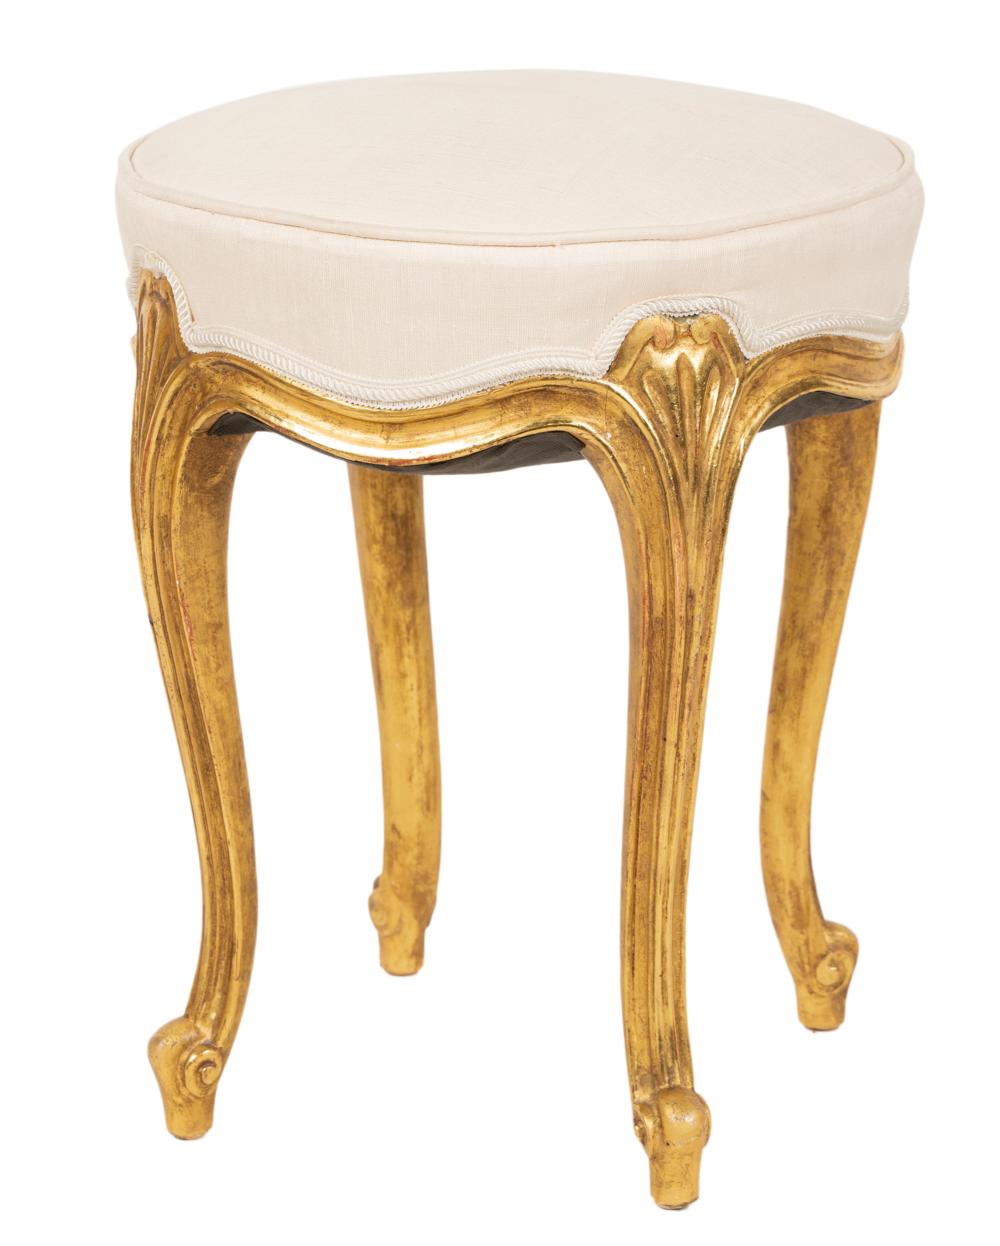 ROSE TARLOW CARVED GILTWOOD STOOLRose